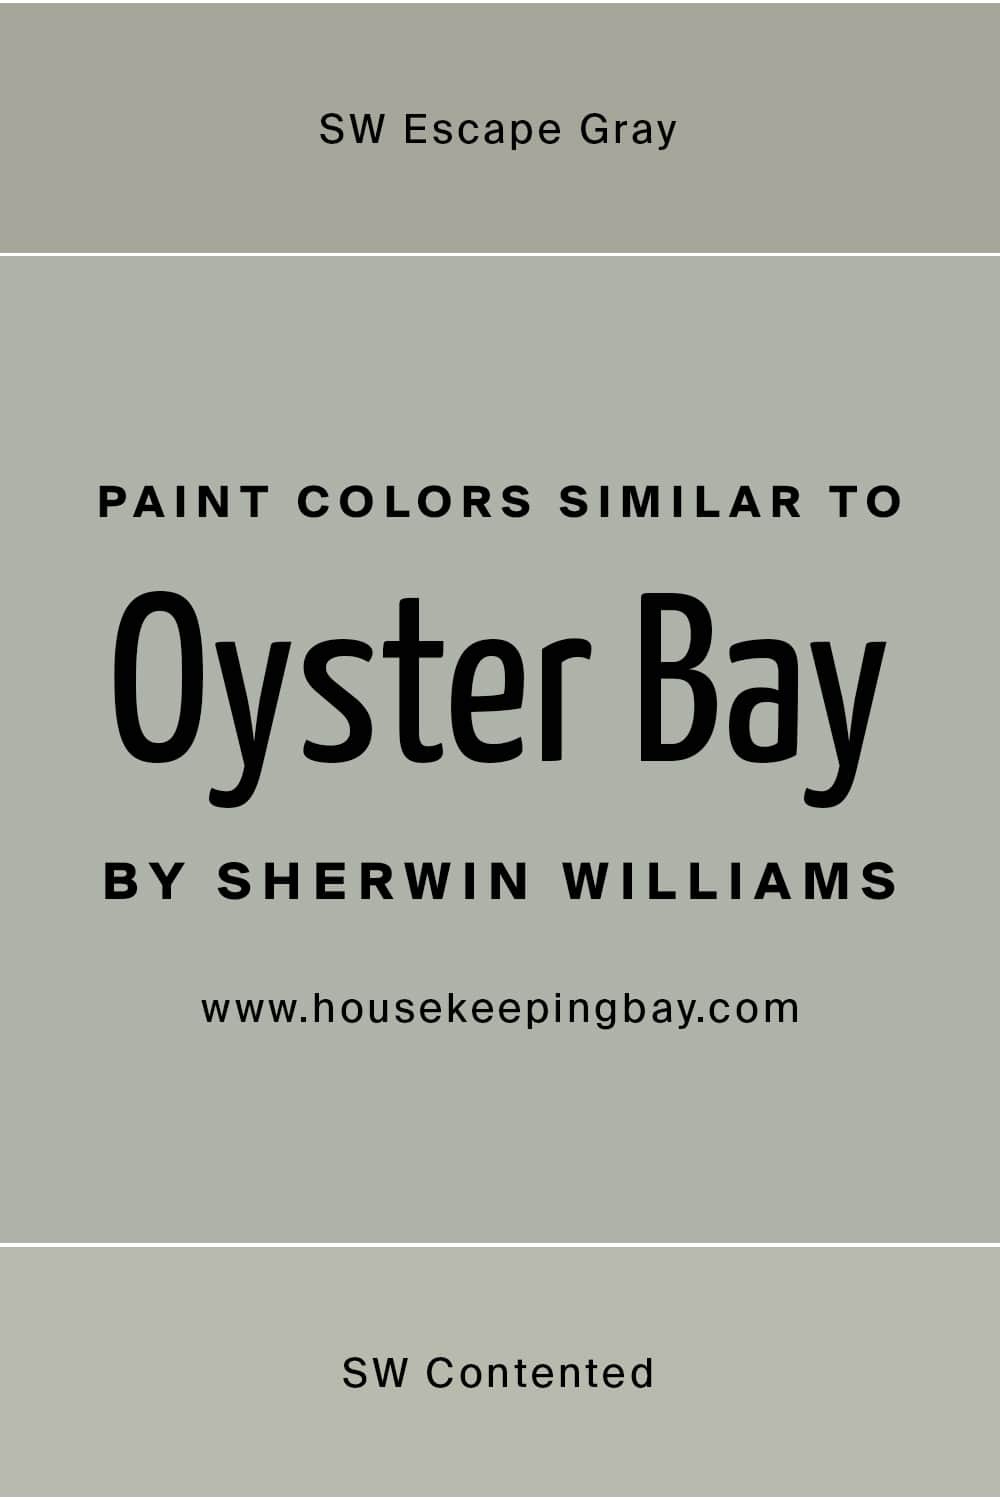 Paint Colors Similar to Oyster Bay by Sherwin Williams